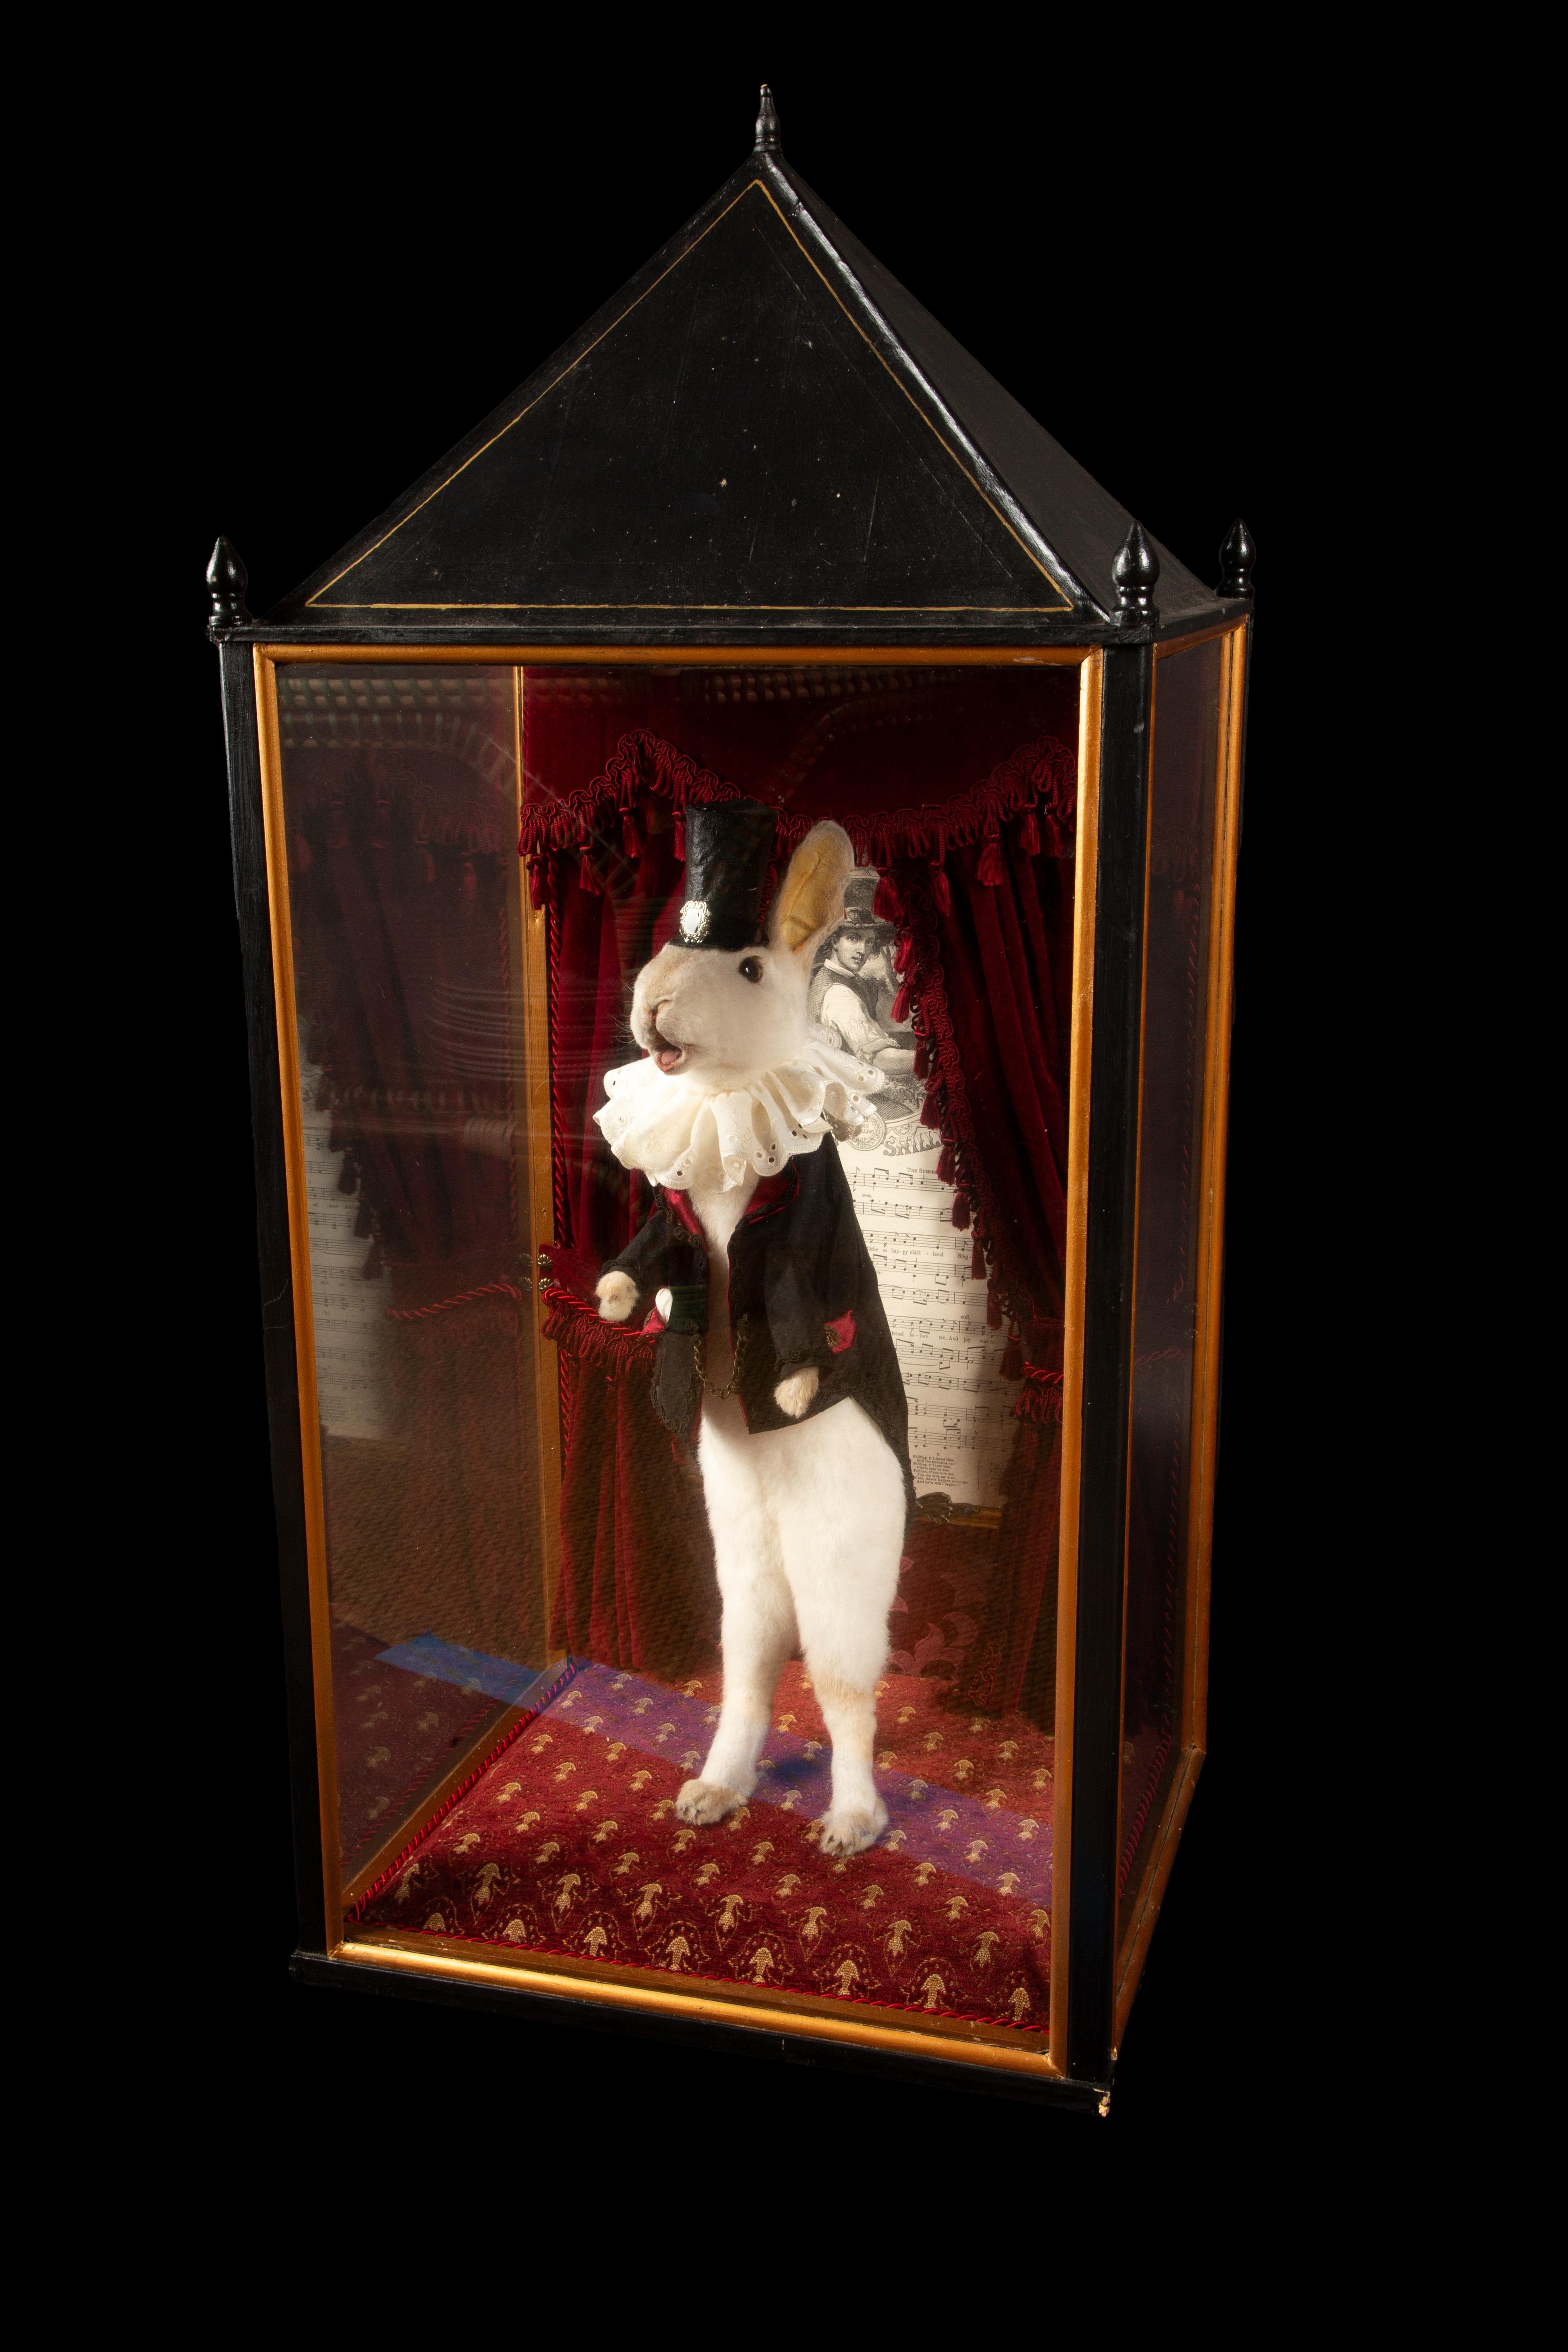 Fur Enchanted Illusions: Taxidermy Magician Rabbit Diorama For Sale